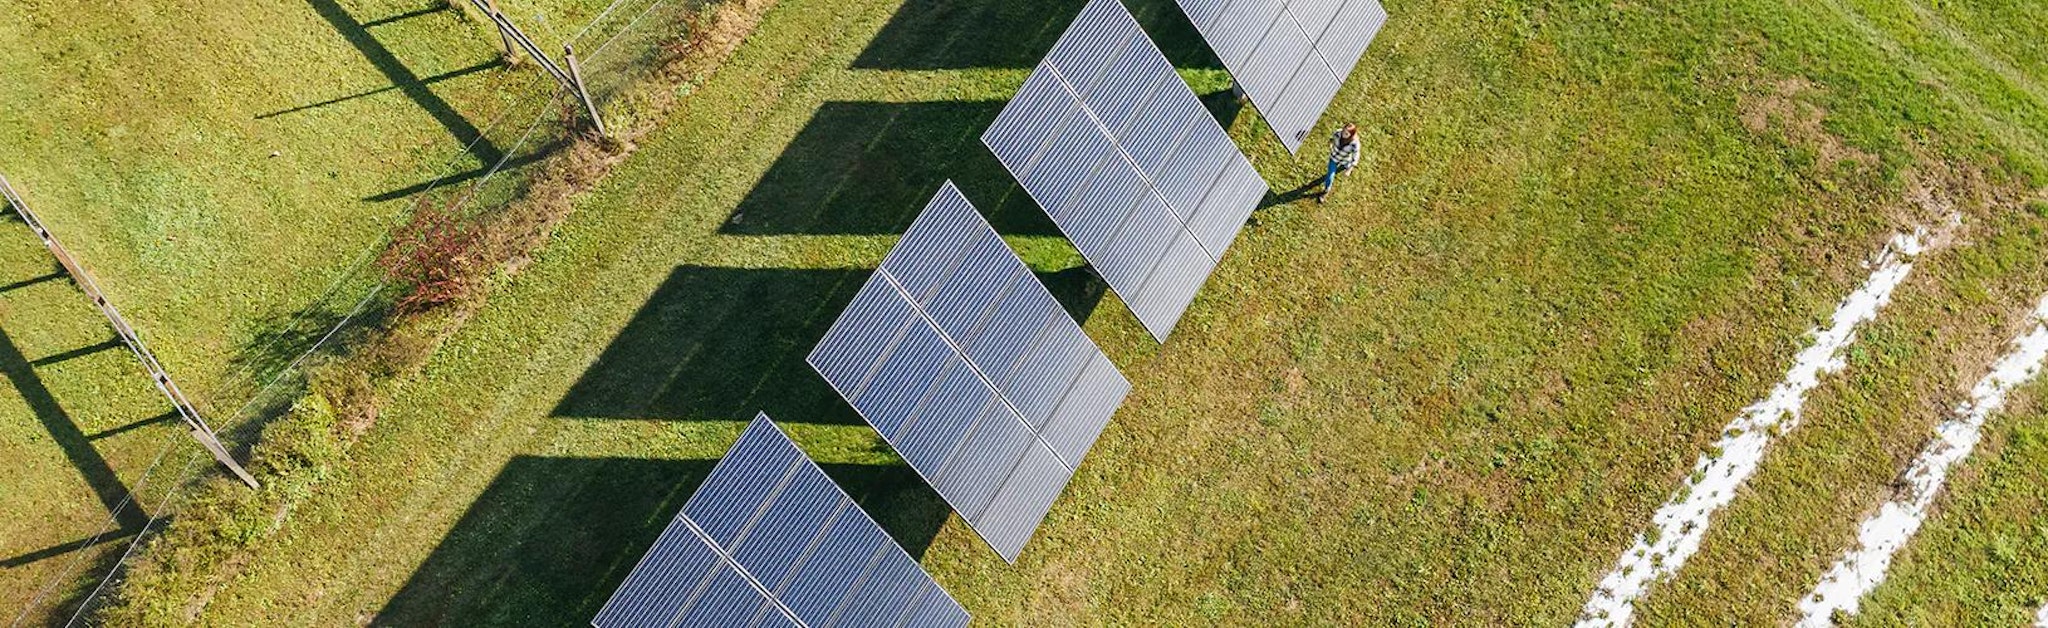 Solar panels representing sustainability as discussed in Larry Fink's letter